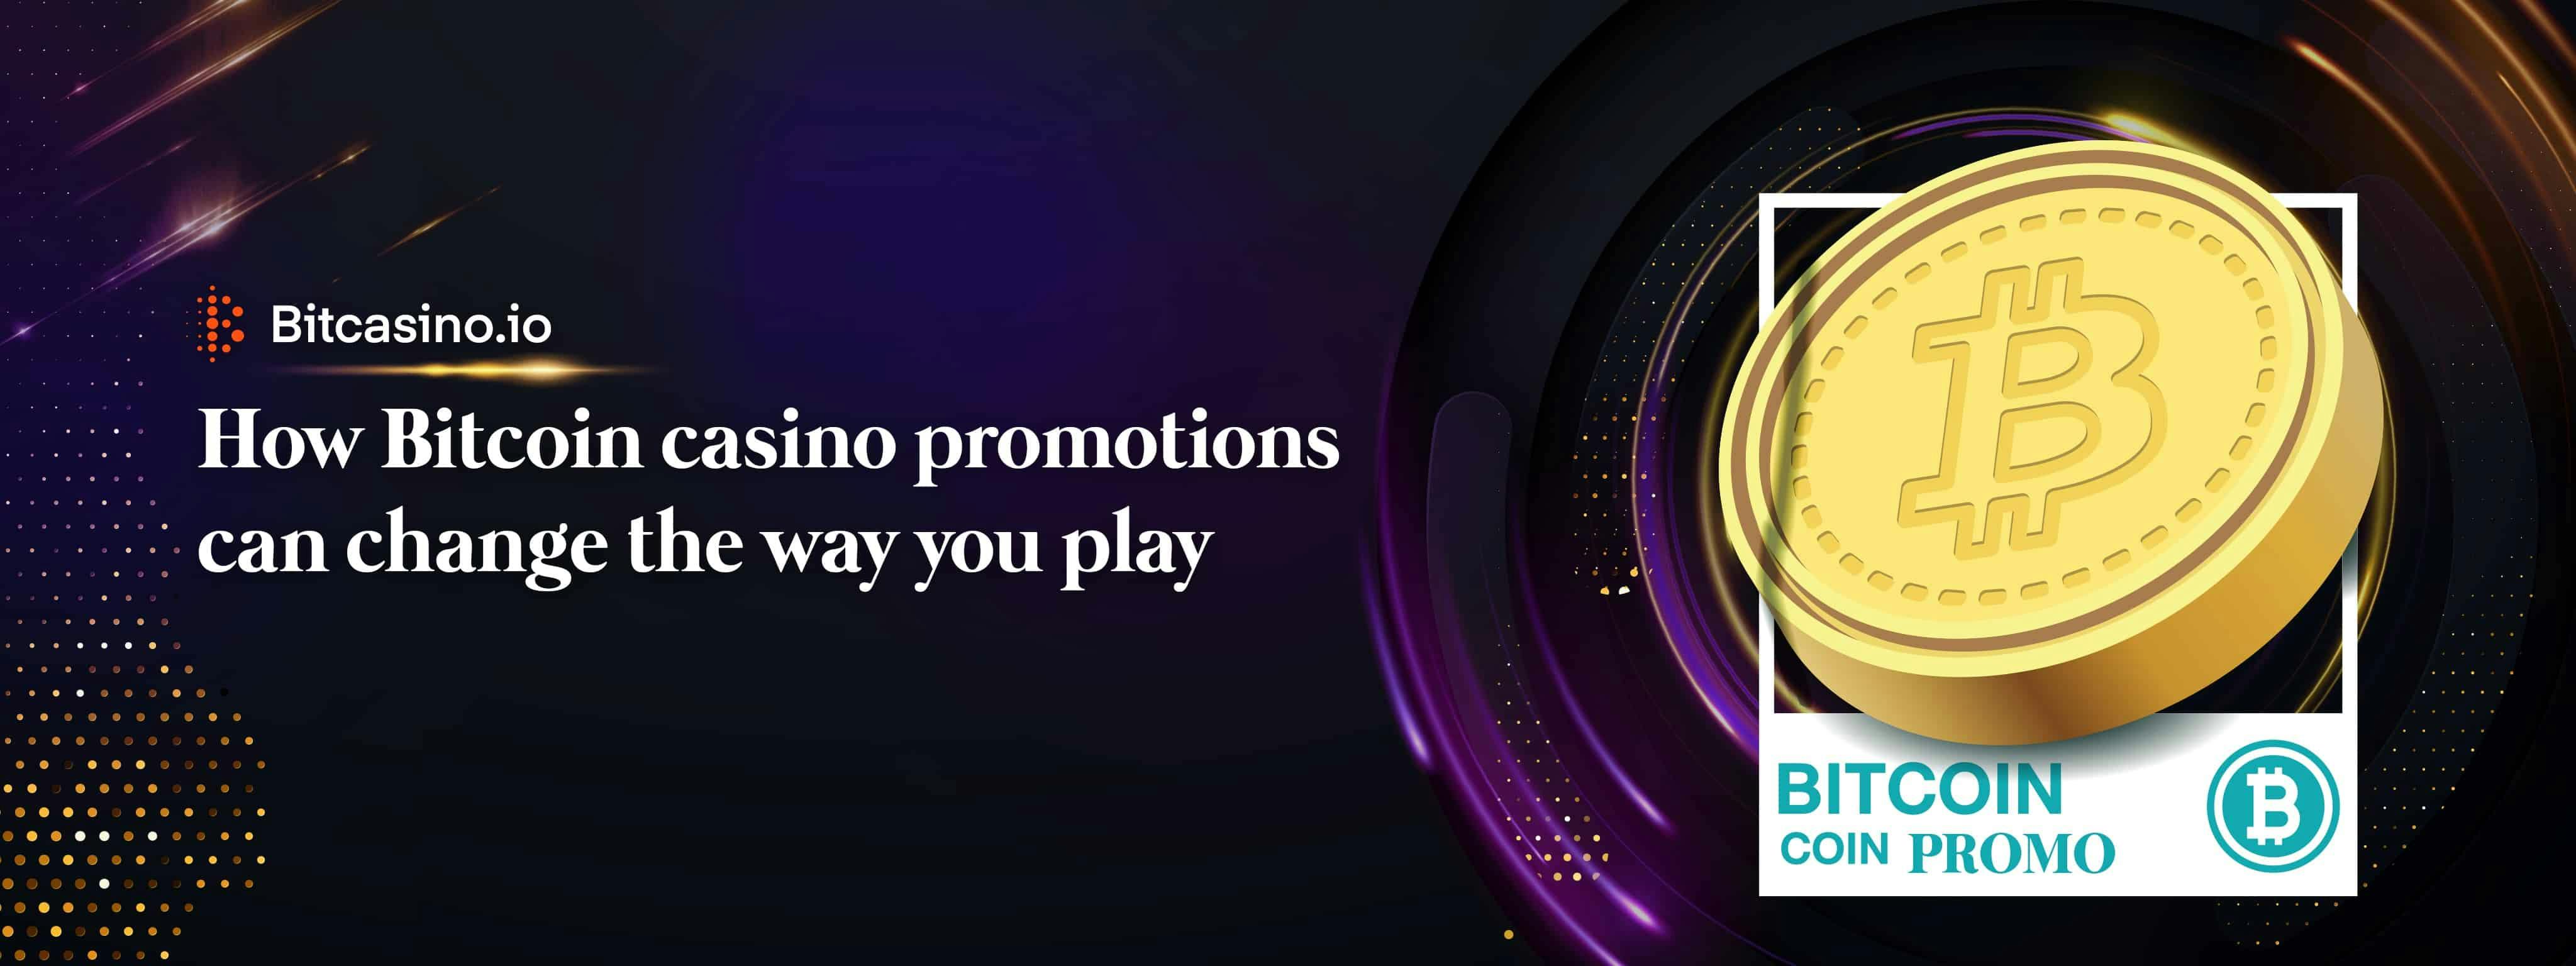 How Bitcoin casino promotions can change the way you play